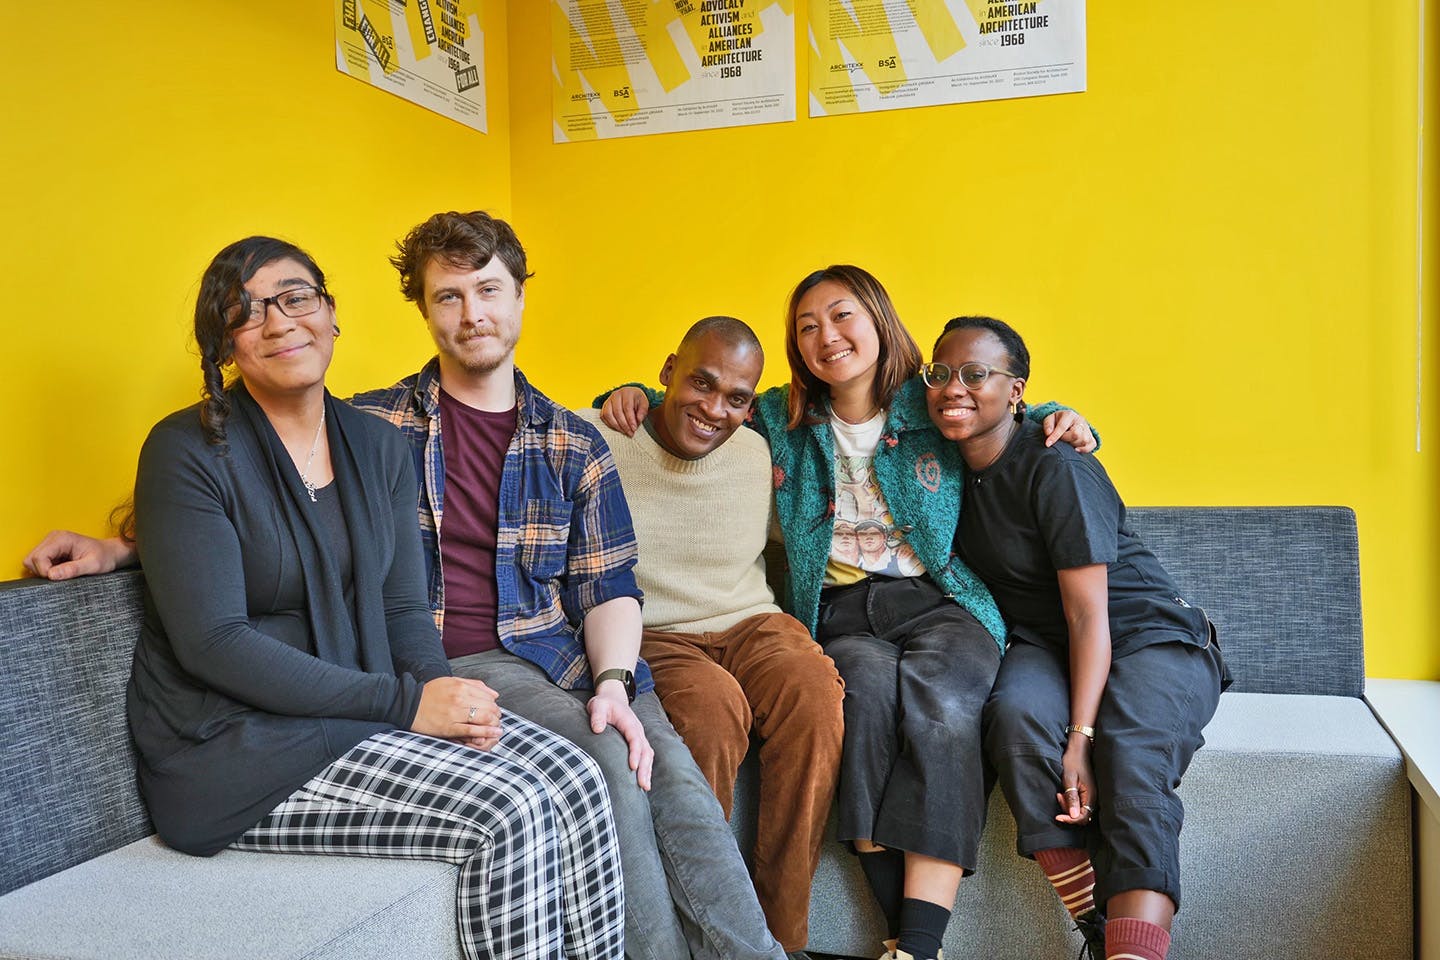 Dorsainvil posing with five members of the SYITF Collective on a couch in front of a yellow wall.